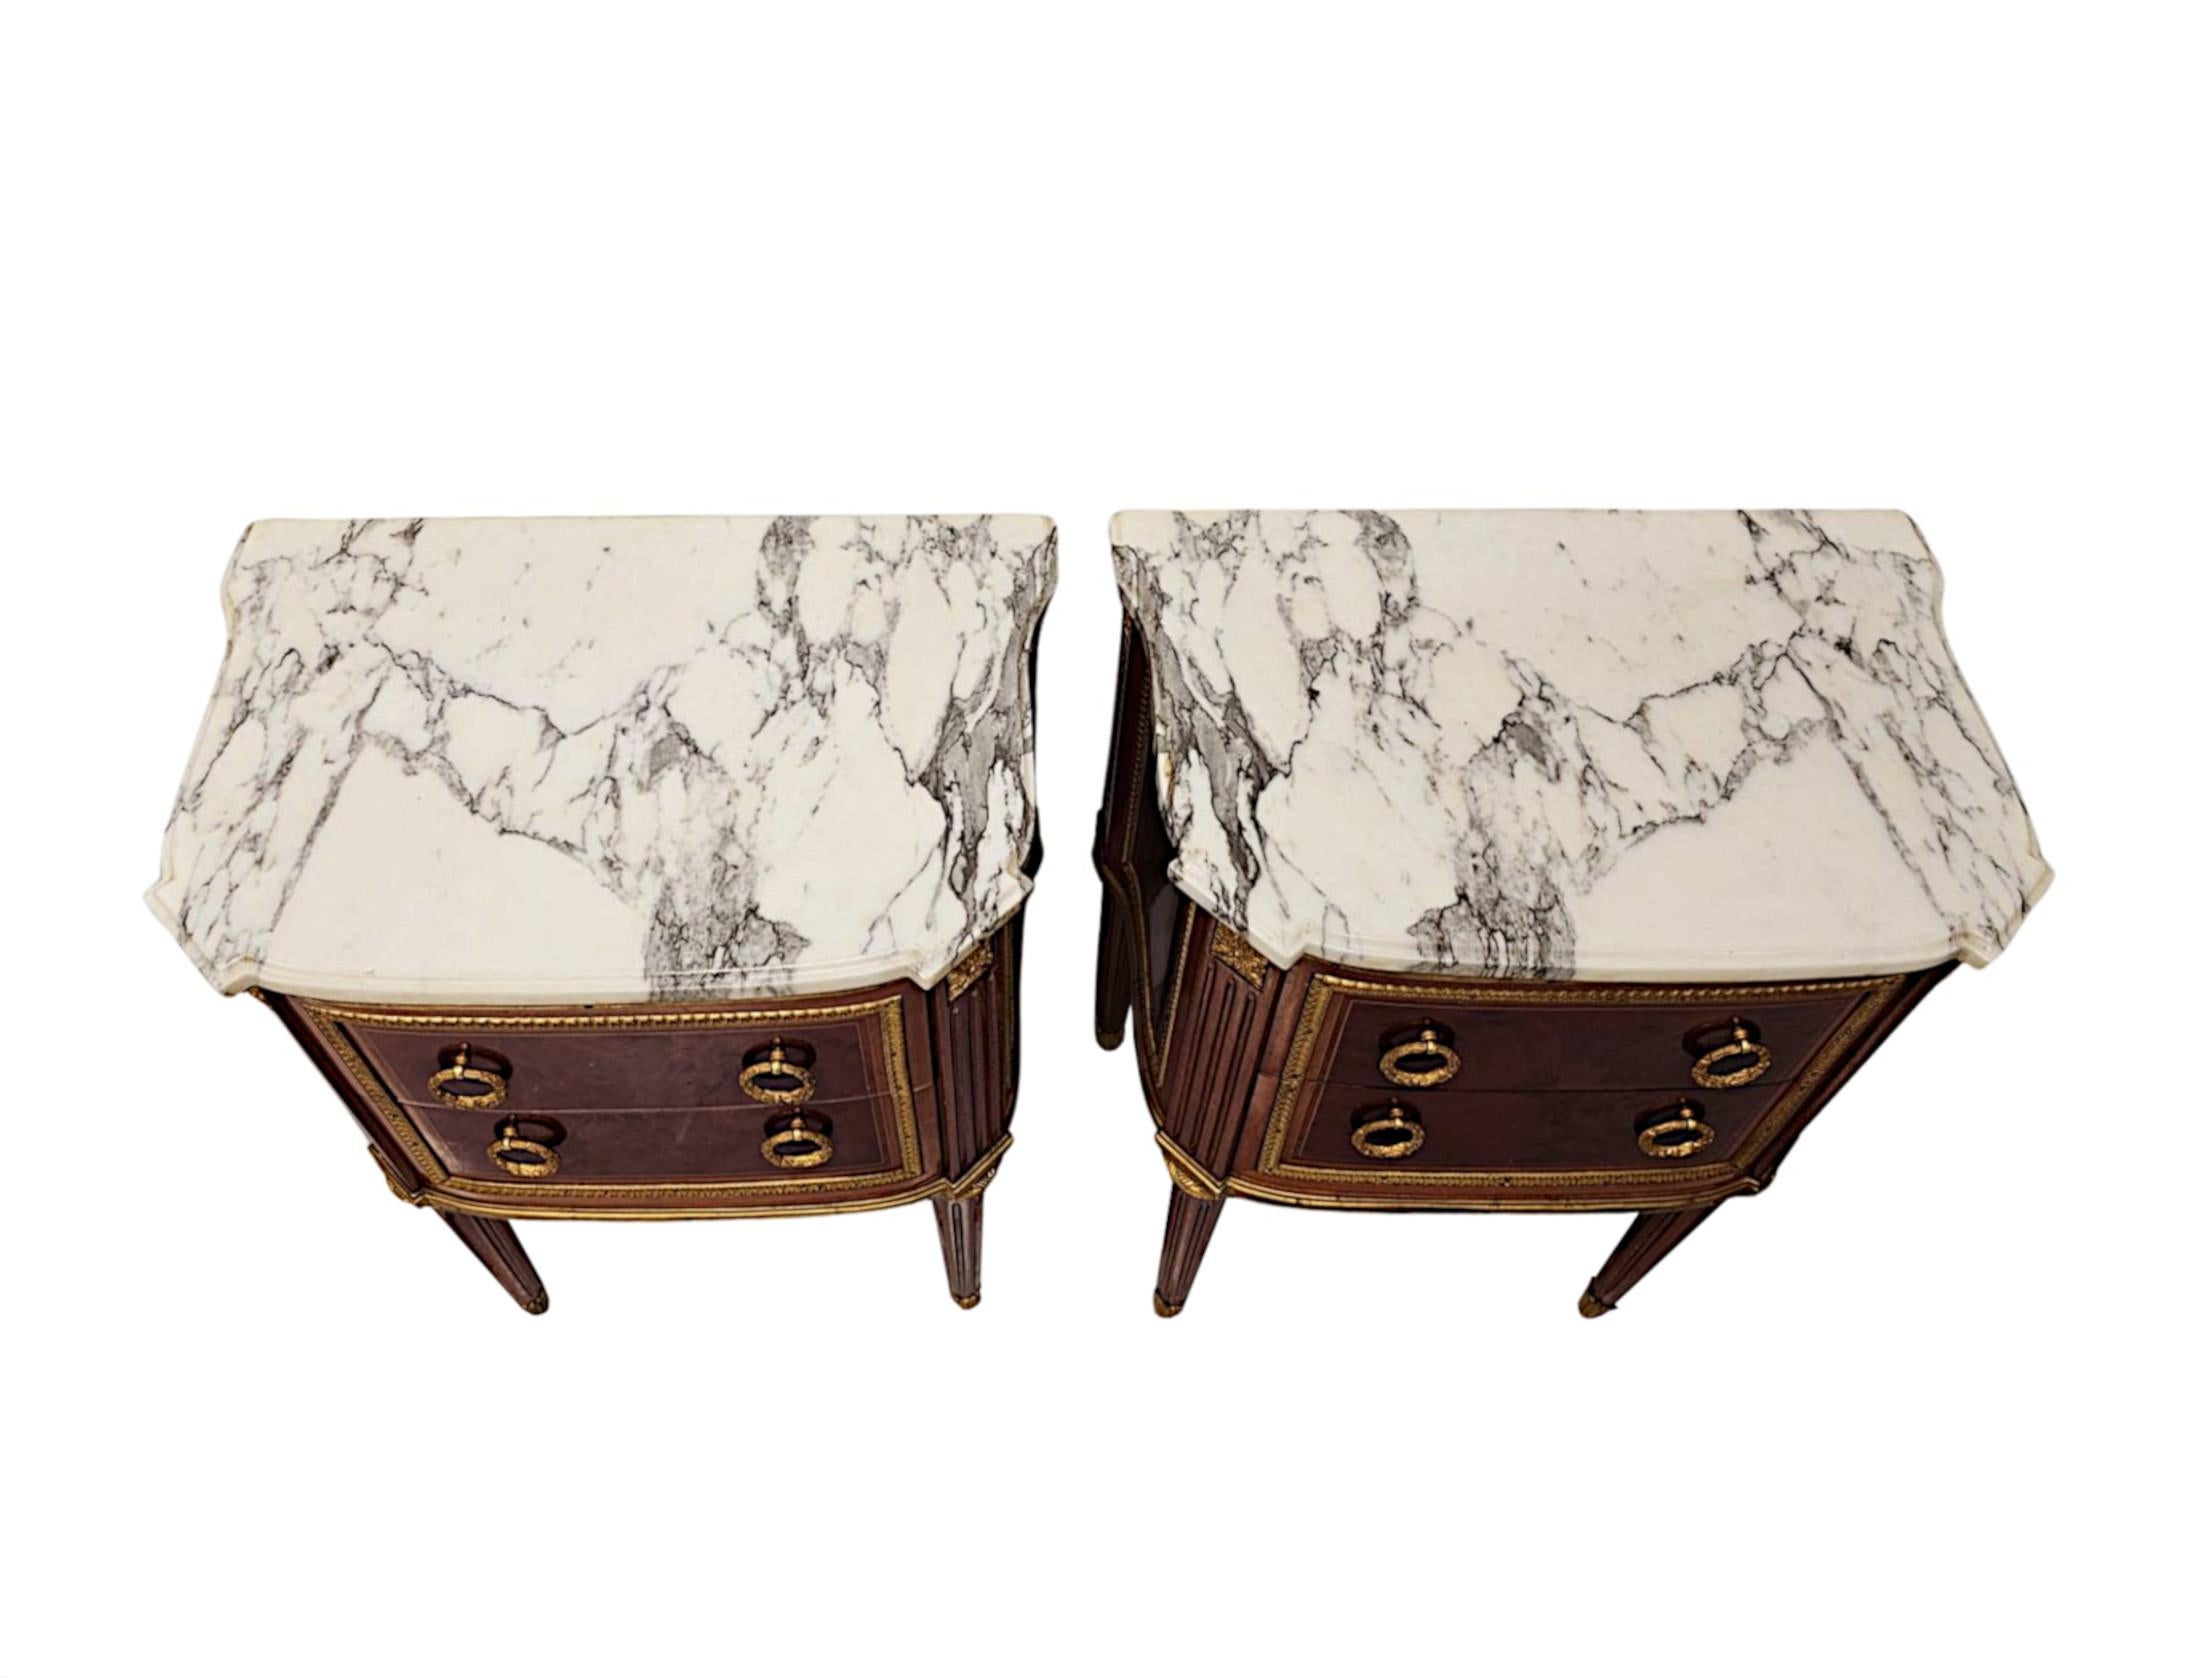 A very fine 20th Century pair of marble top finely carved pair of side tables or chest of drawers of exceptional quality, ormolu mounted throughout and with well figured timbers comprising of kingwood and mahogany with gorgeously rich patination and